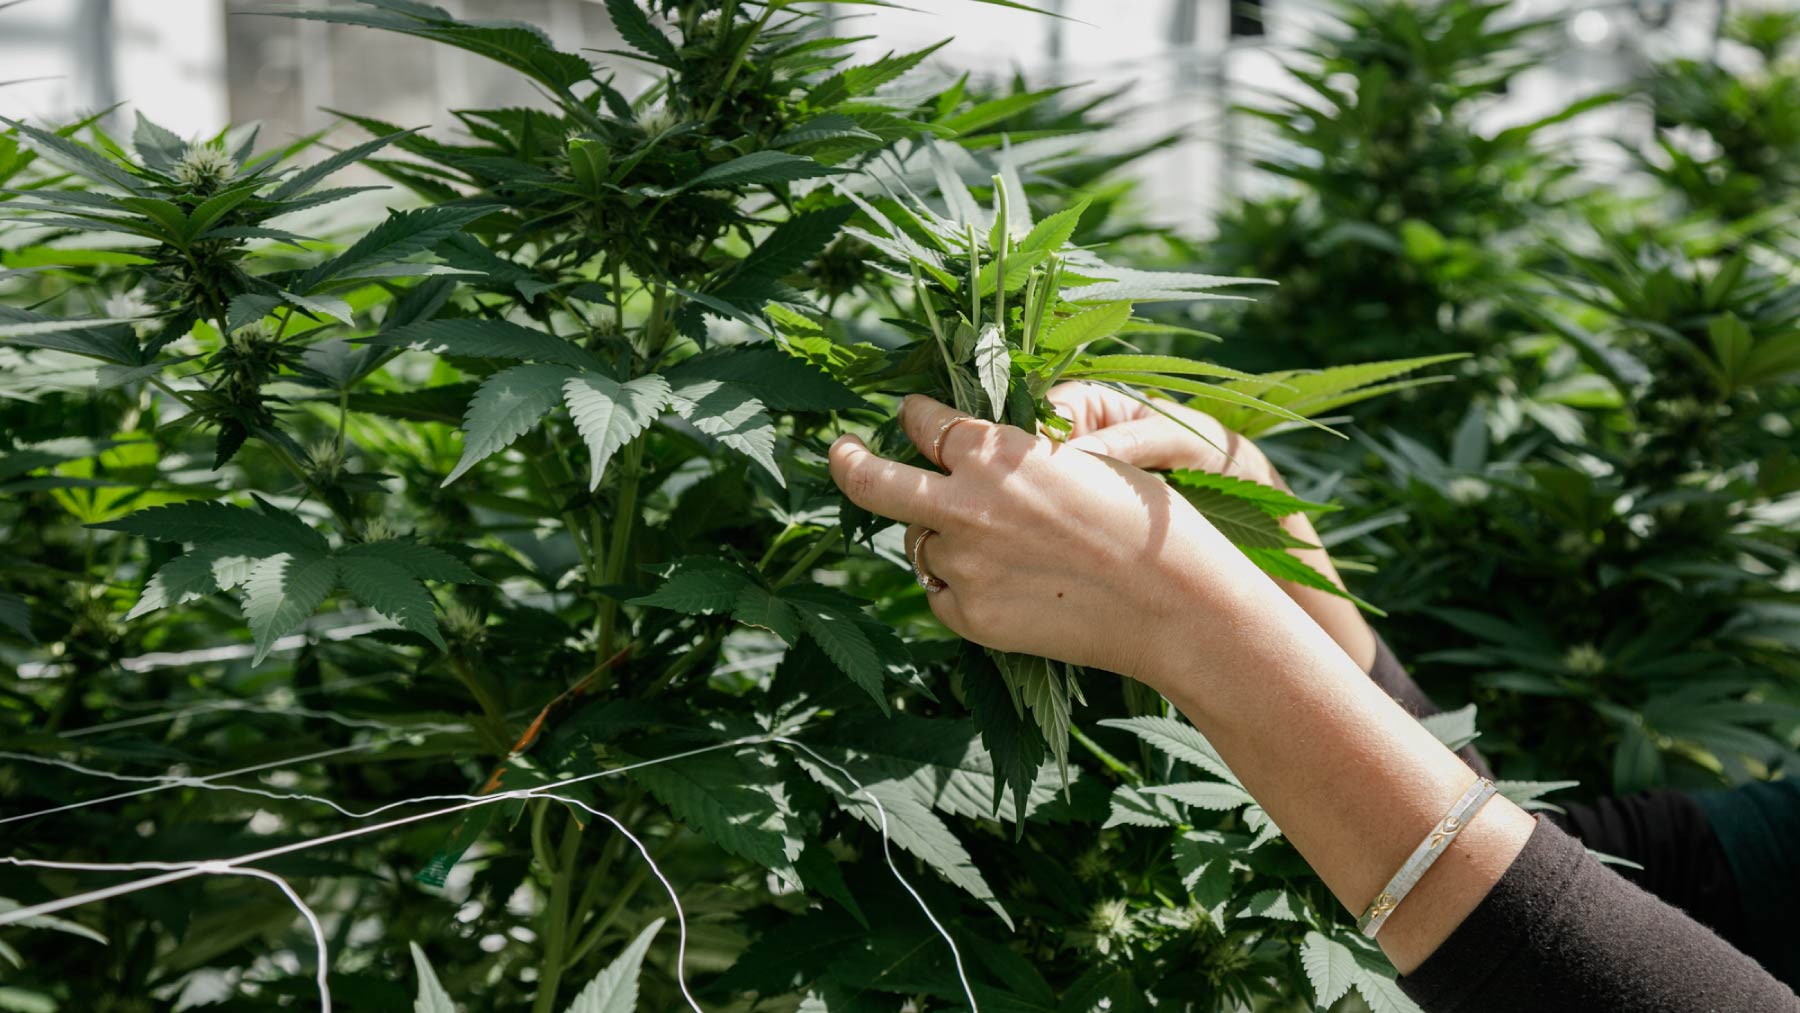 hands picking cannabis plant in greenhouse